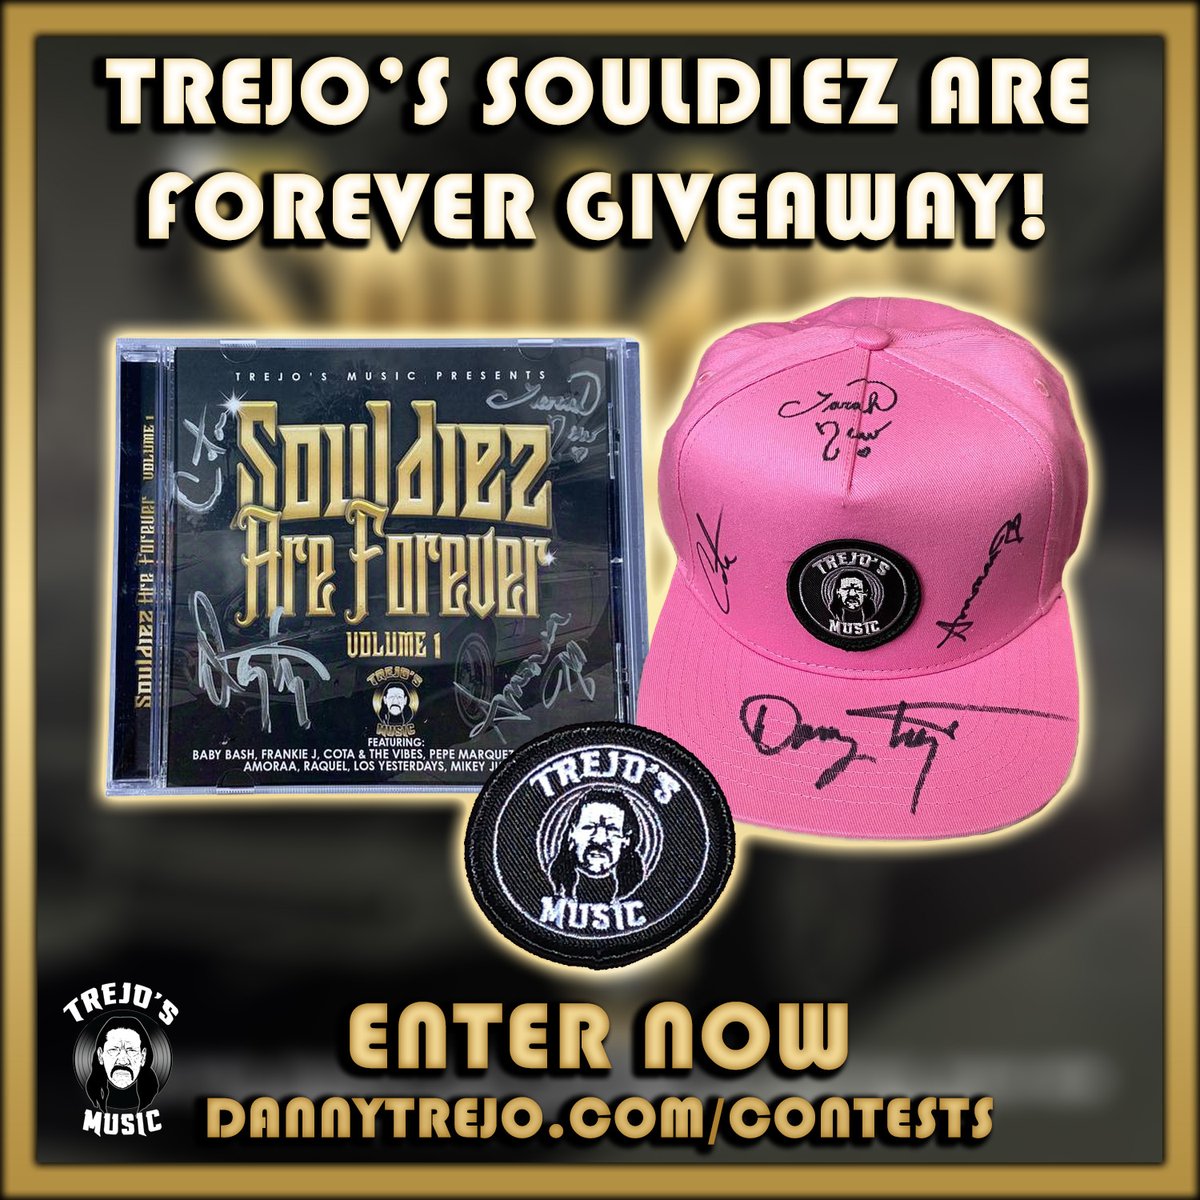 Join Trejo's Souldiez Are Forever Giveaway! 10 Lucky Winners will win a #TrejosMusic Hat & Souldiez Are Forever CD signed by #CotaTheBarber @tarahnew @amoraajofficial & @officialDannyT & a Trejo's Music Patch! Multiple ways to Gain Entries, Enter Now: dannytrejo.com/contests